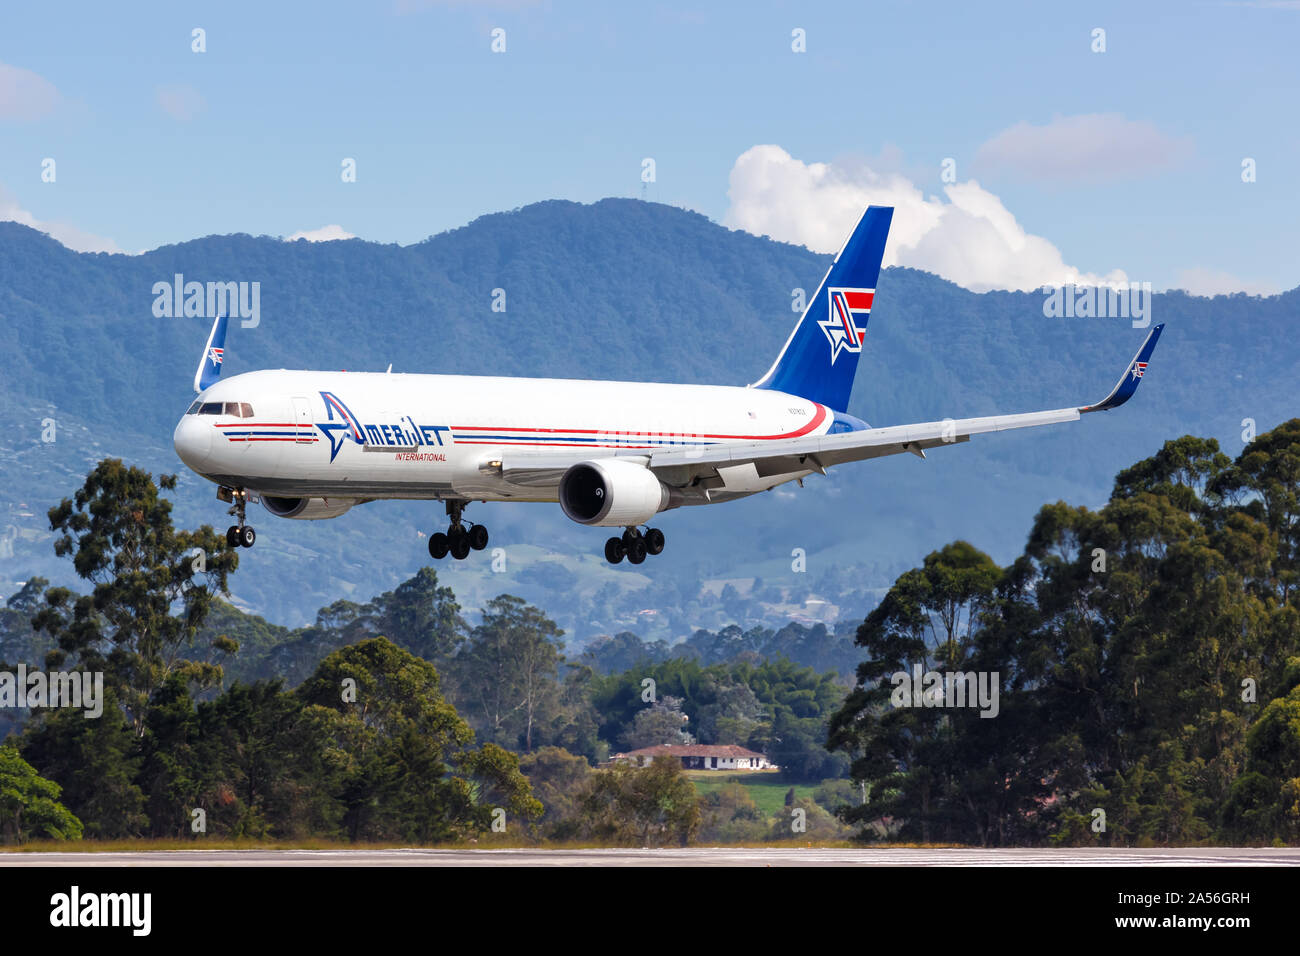 Medellin, Colombia – January 25, 2019: AmeriJet International Boeing 767-300F airplane at Medellin airport (MDE) in Colombia. Stock Photo